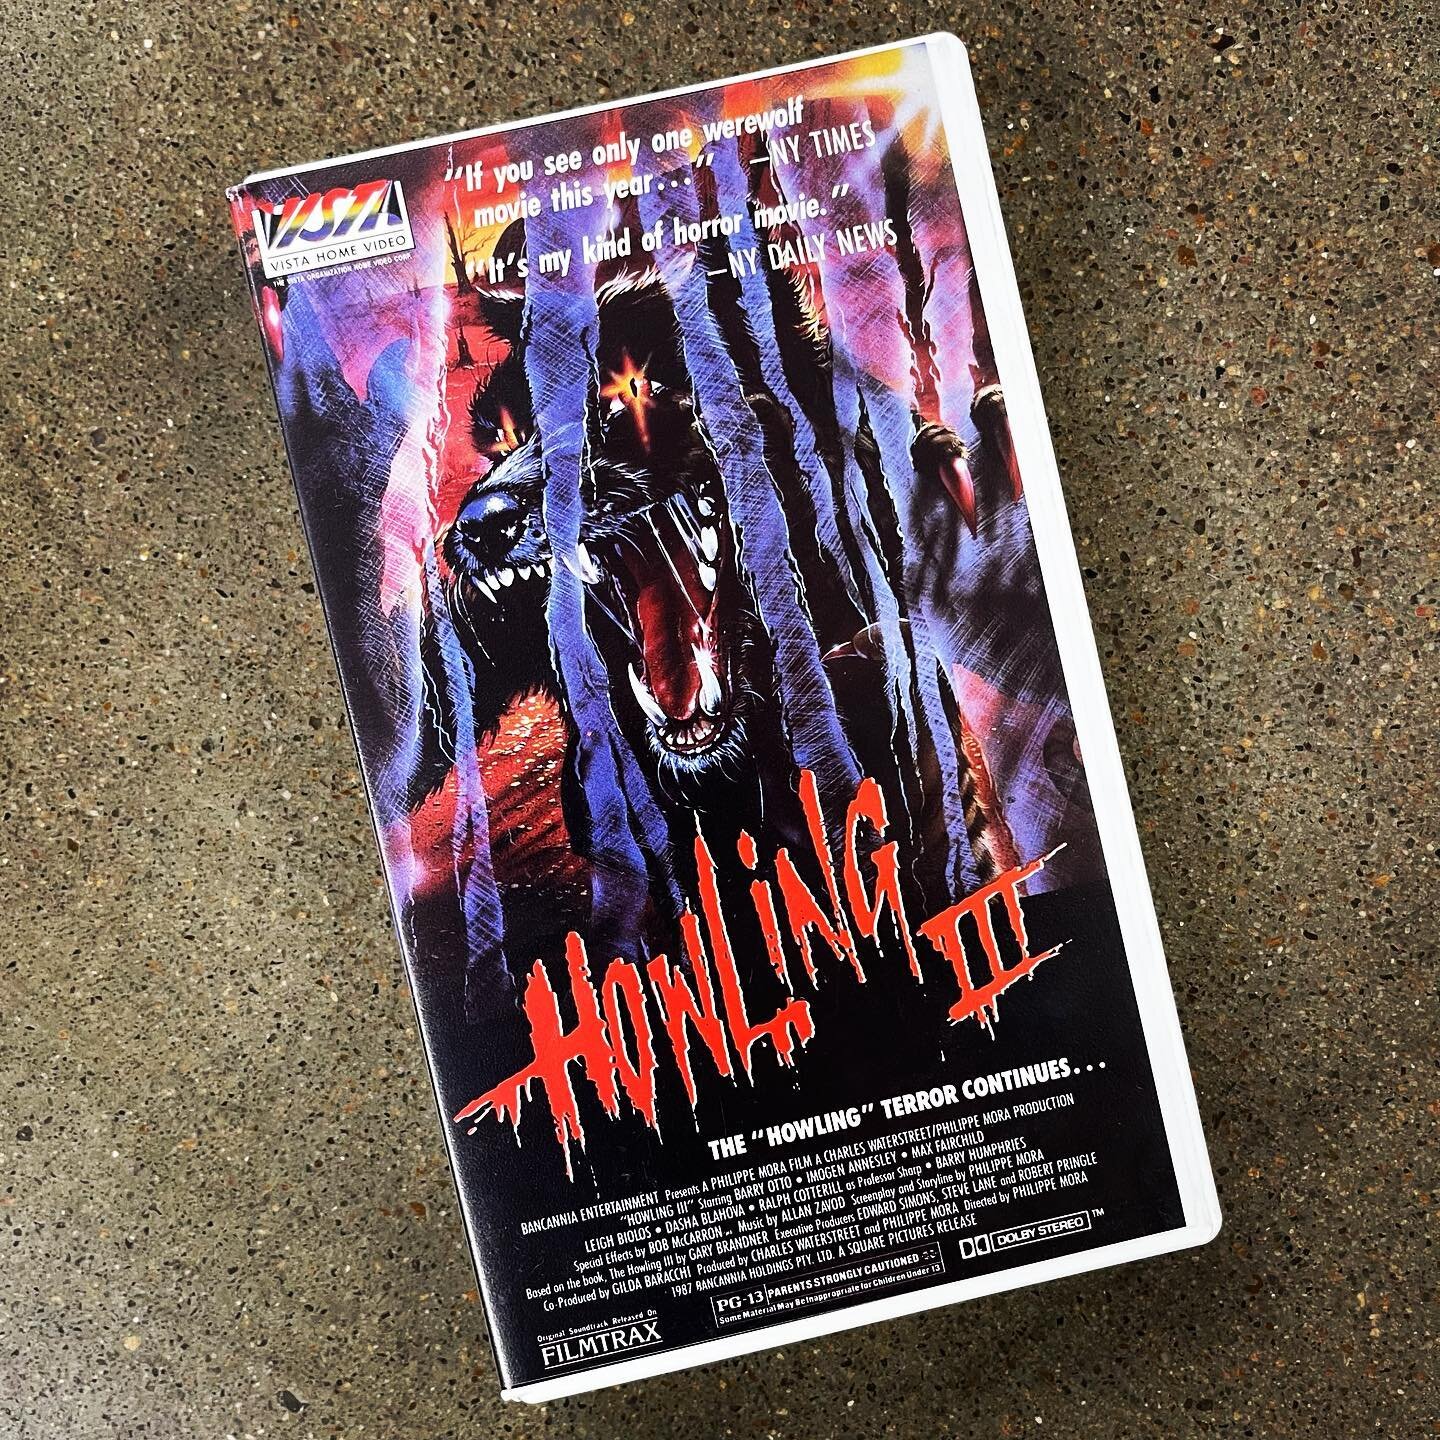 Not many horror series jump the shark as quickly as The Howling (1981). Joe Dante's original 🐺 classic stands out against the sequel and the third and final installment released in theaters: Howling III The Marsupials (1987) featuring an elevated mu